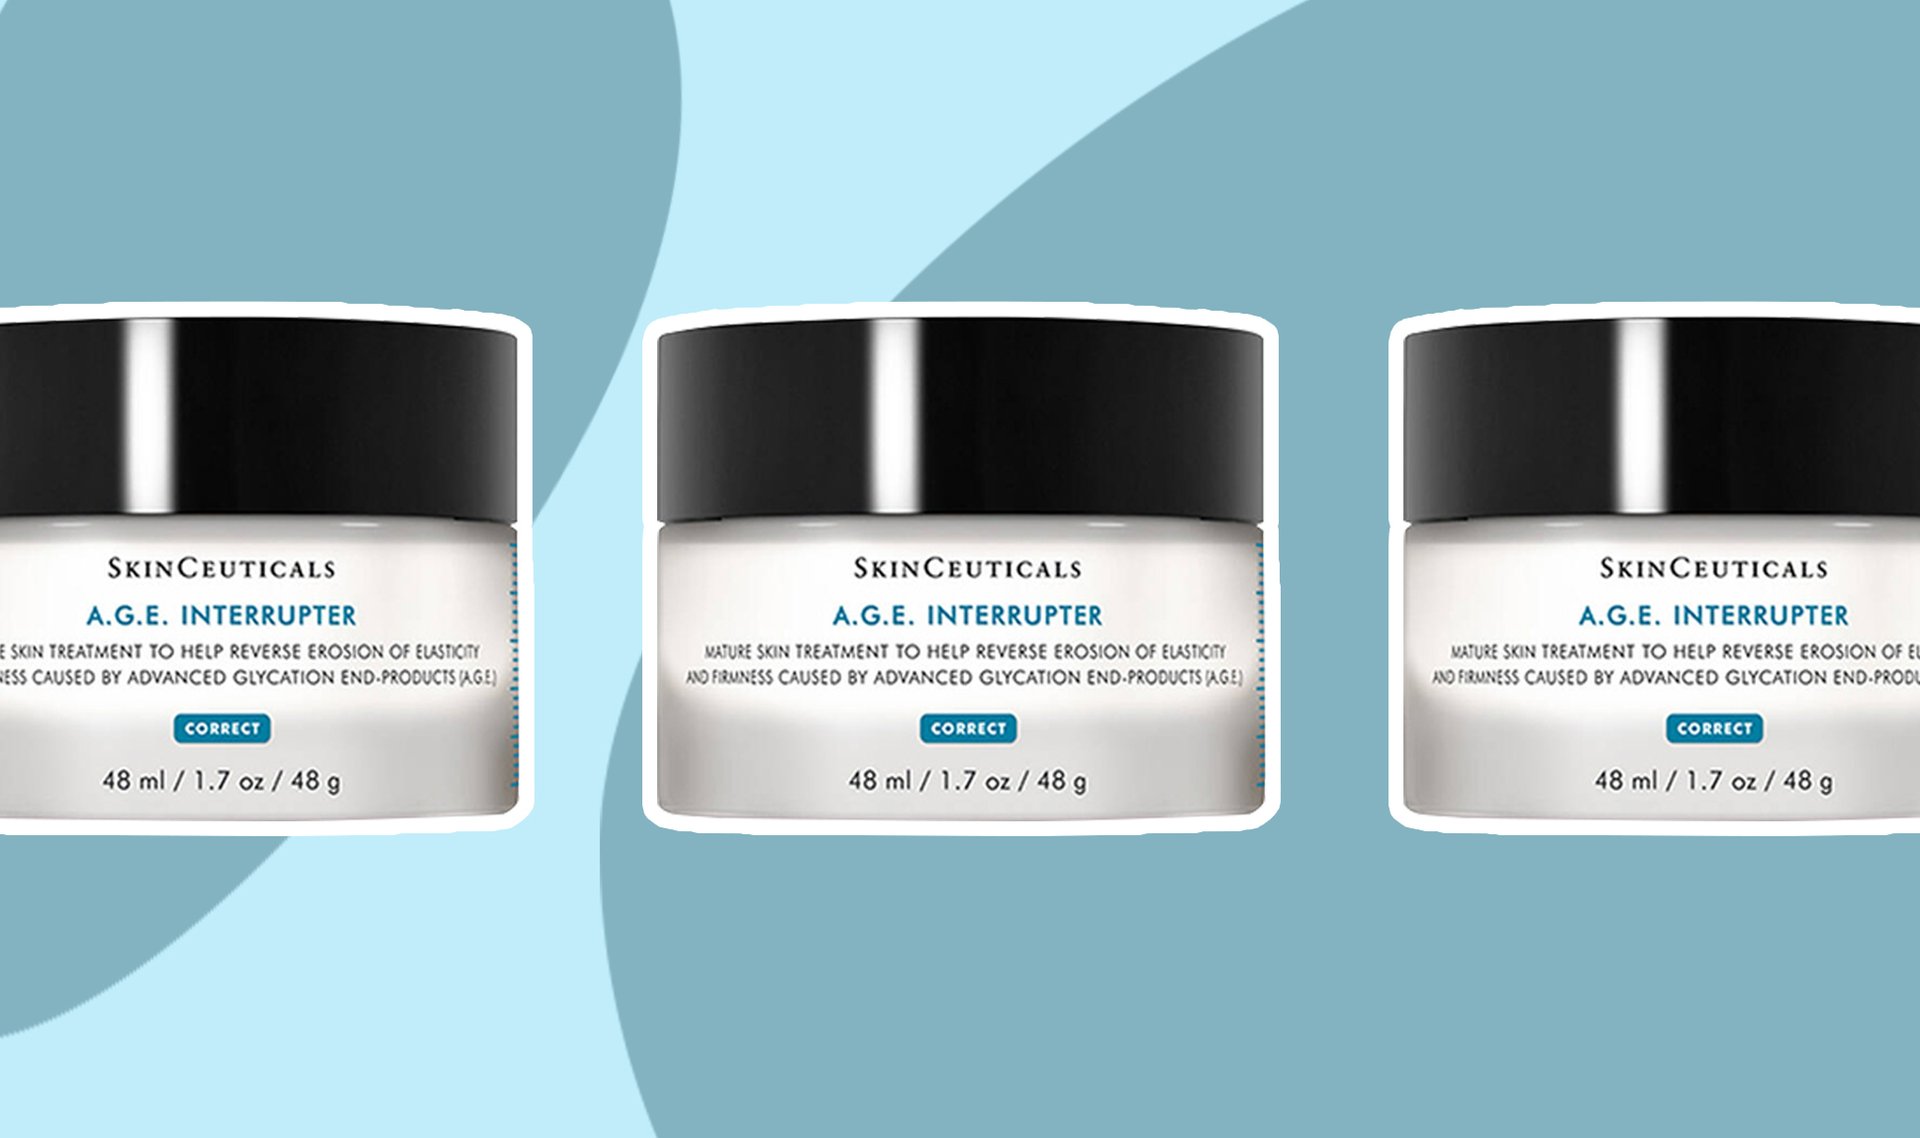 Our Editor Put the SkinCeuticals A.G.E. Interrupter to the Test